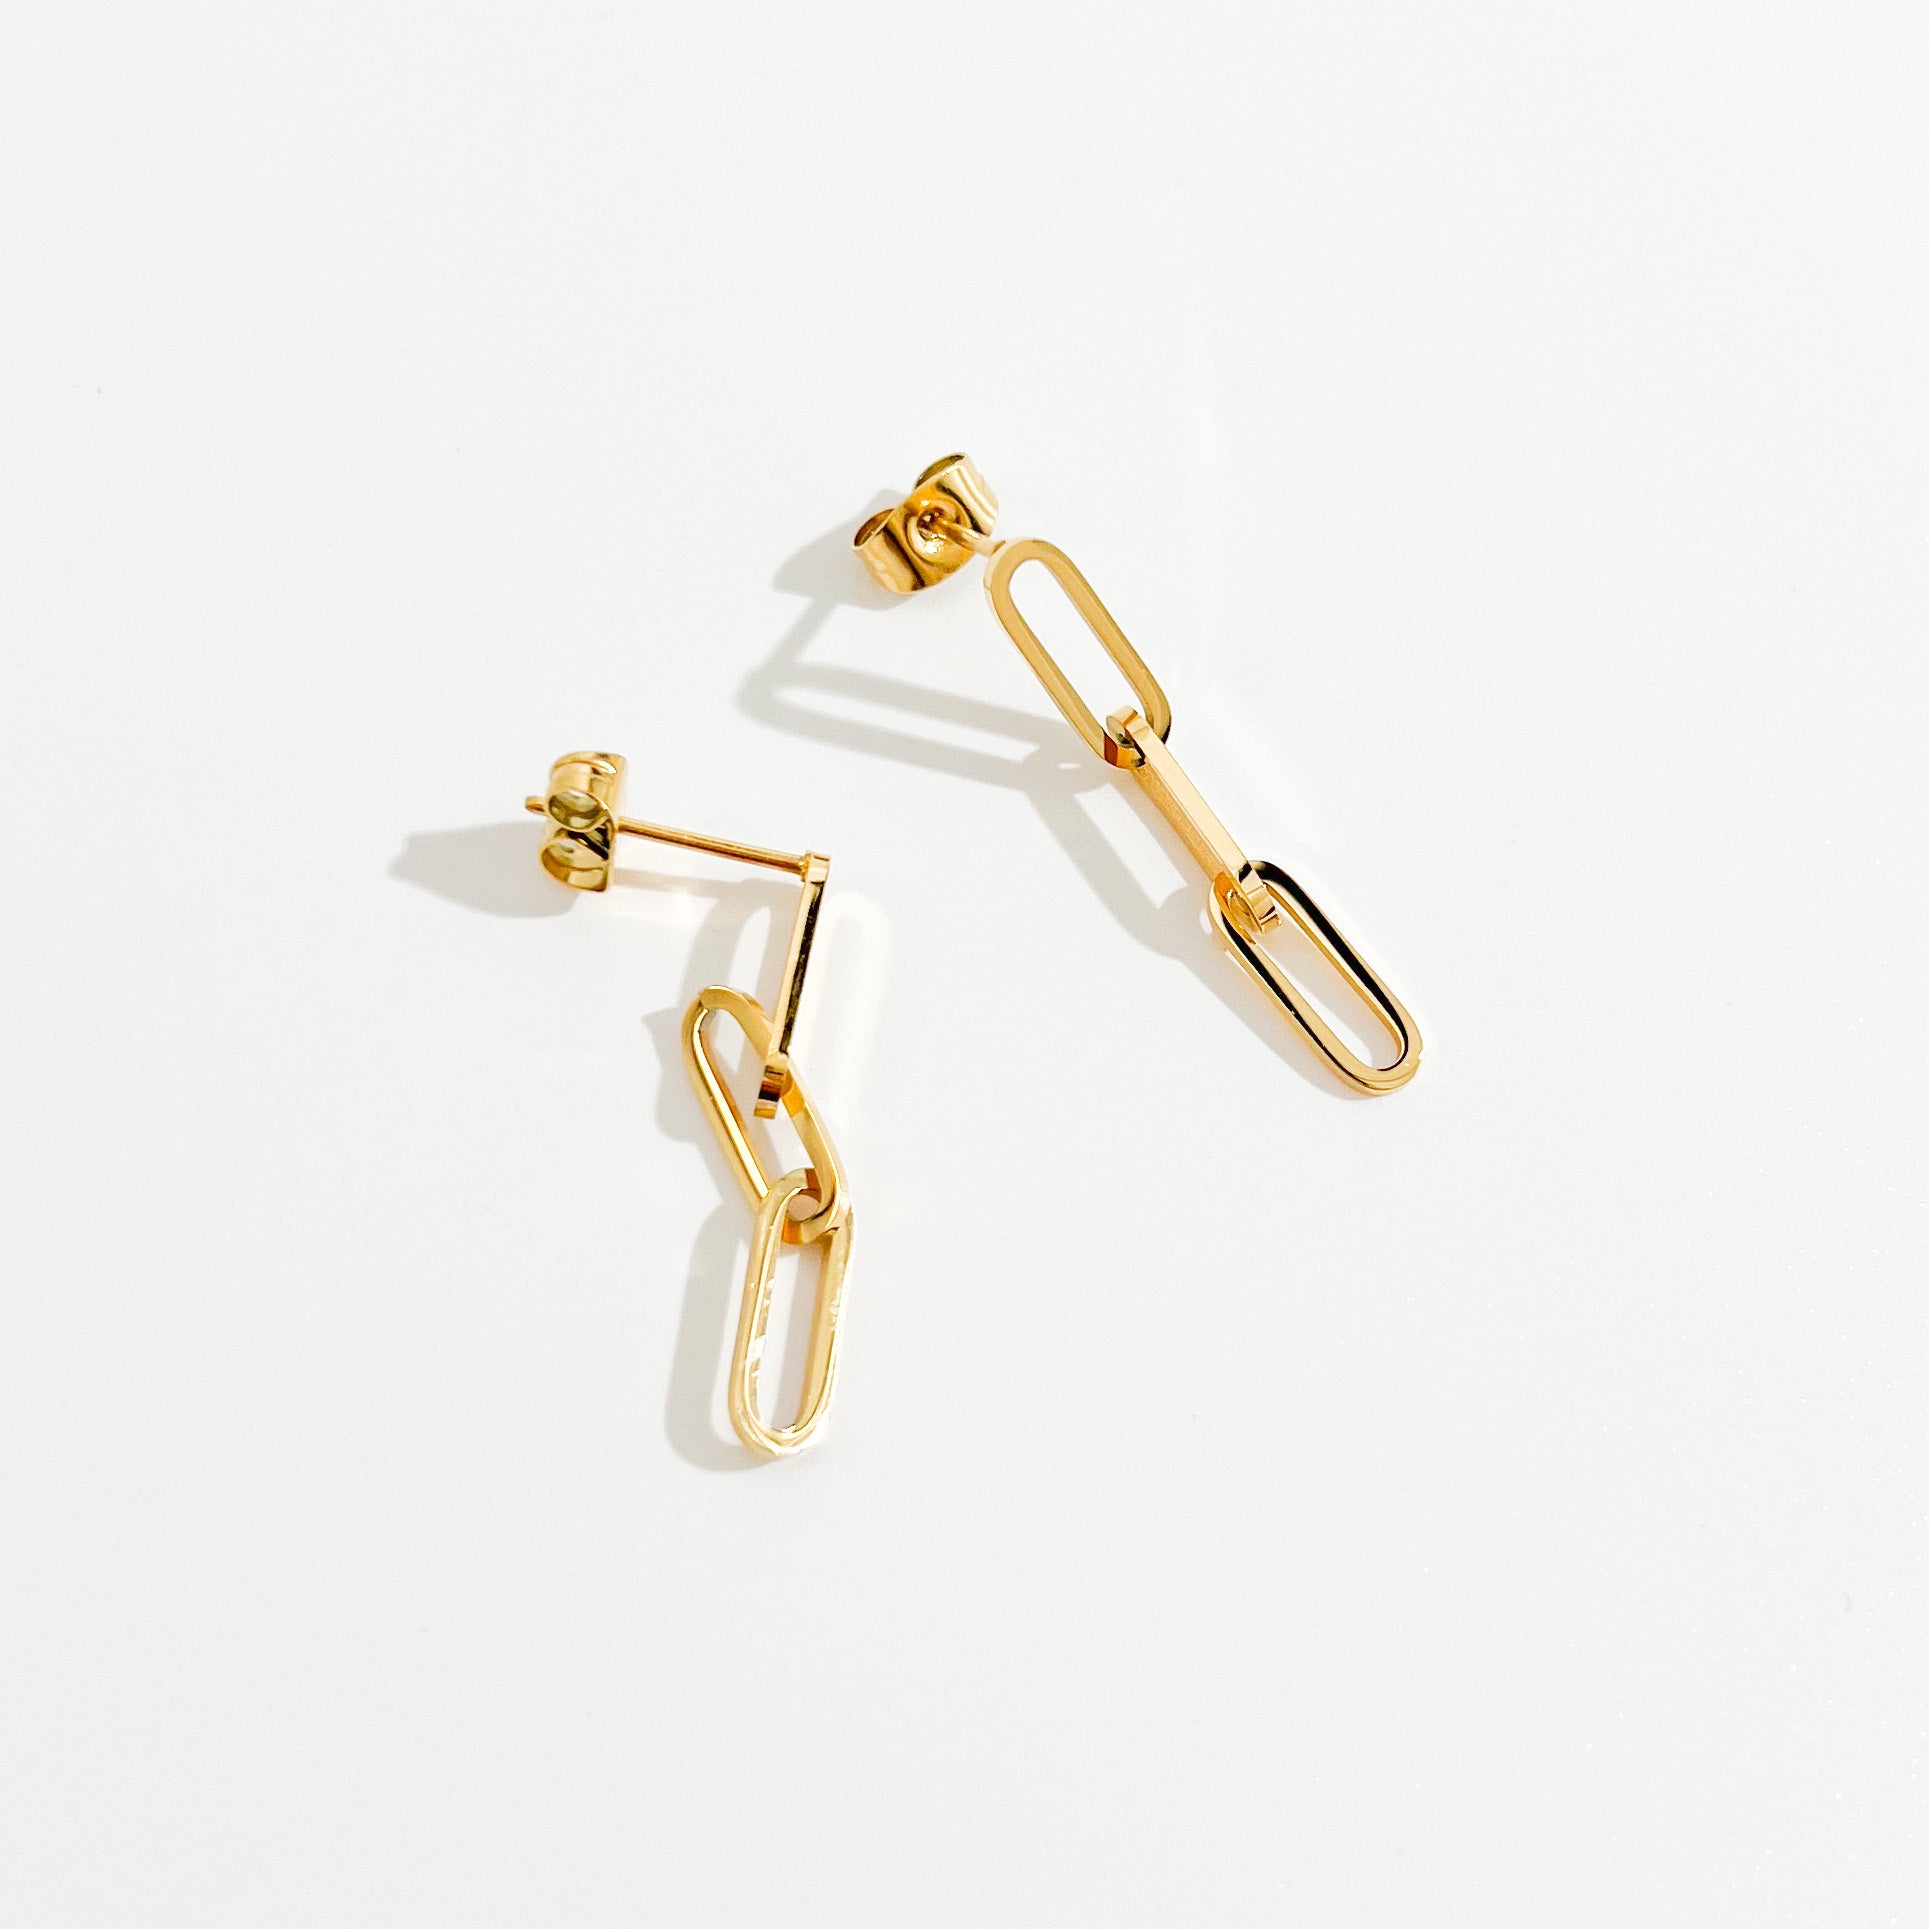 Drop The Link Earrings - Flaire & Co.